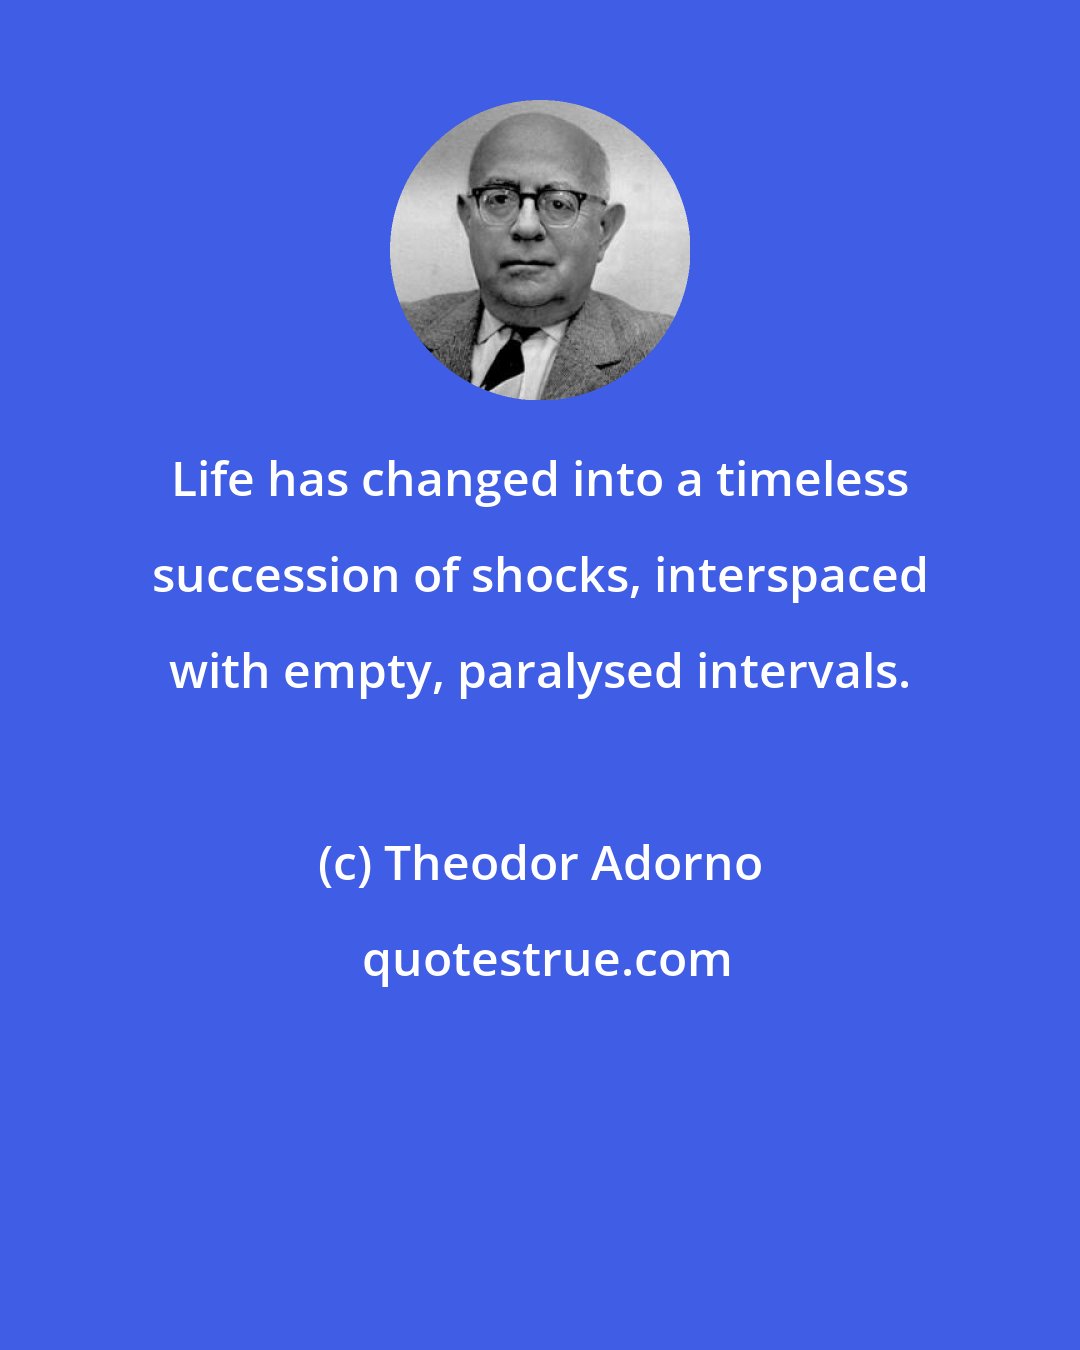 Theodor Adorno: Life has changed into a timeless succession of shocks, interspaced with empty, paralysed intervals.